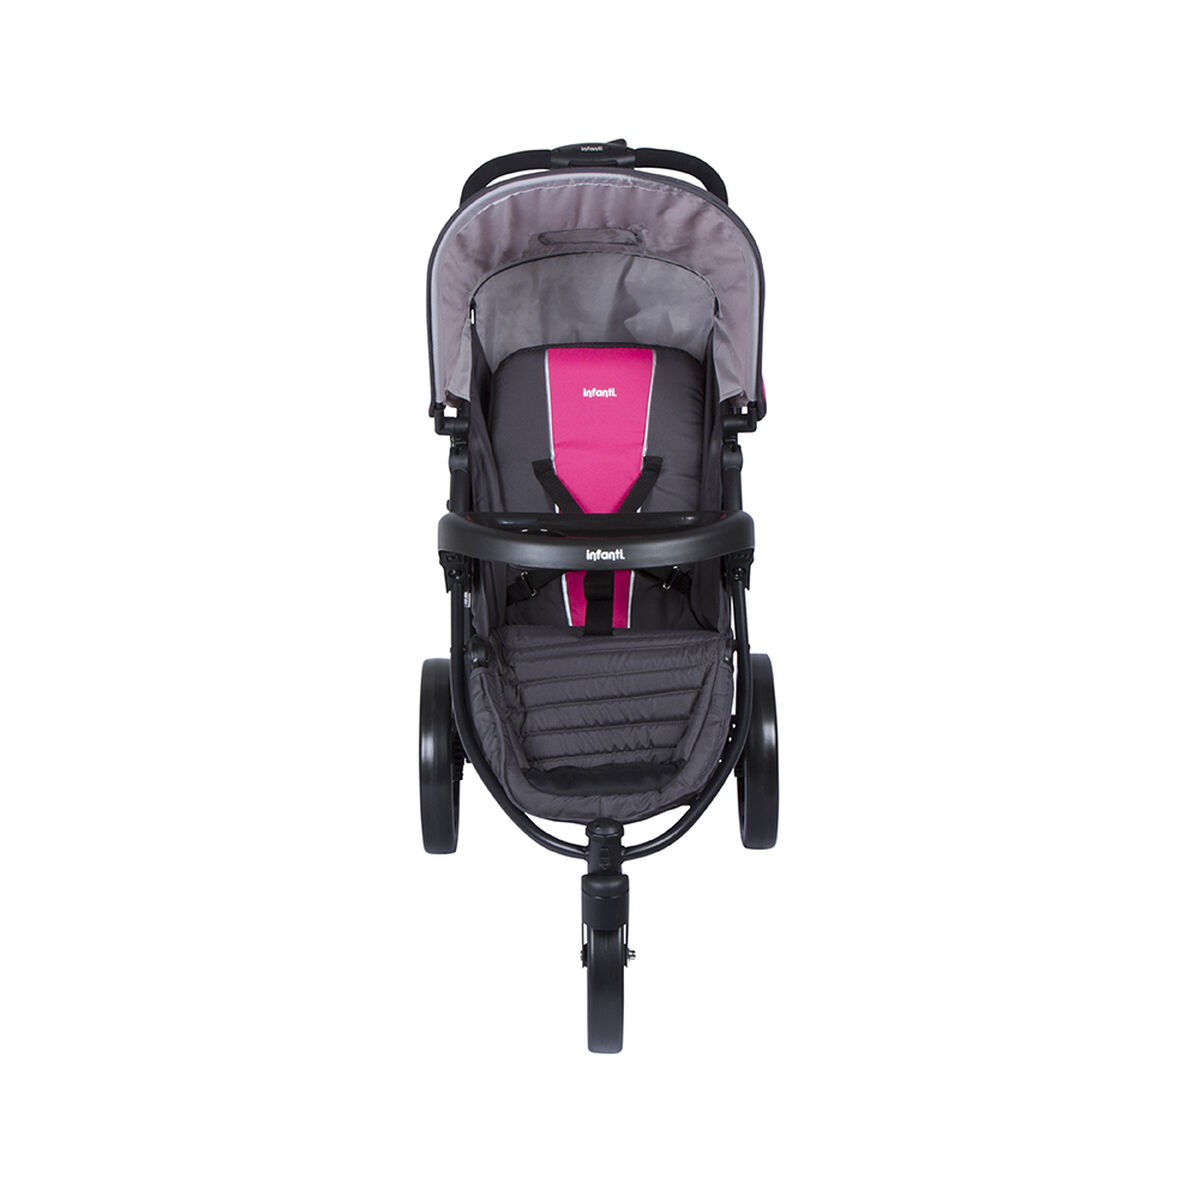 Coche Travel System Tizzy Race Pink